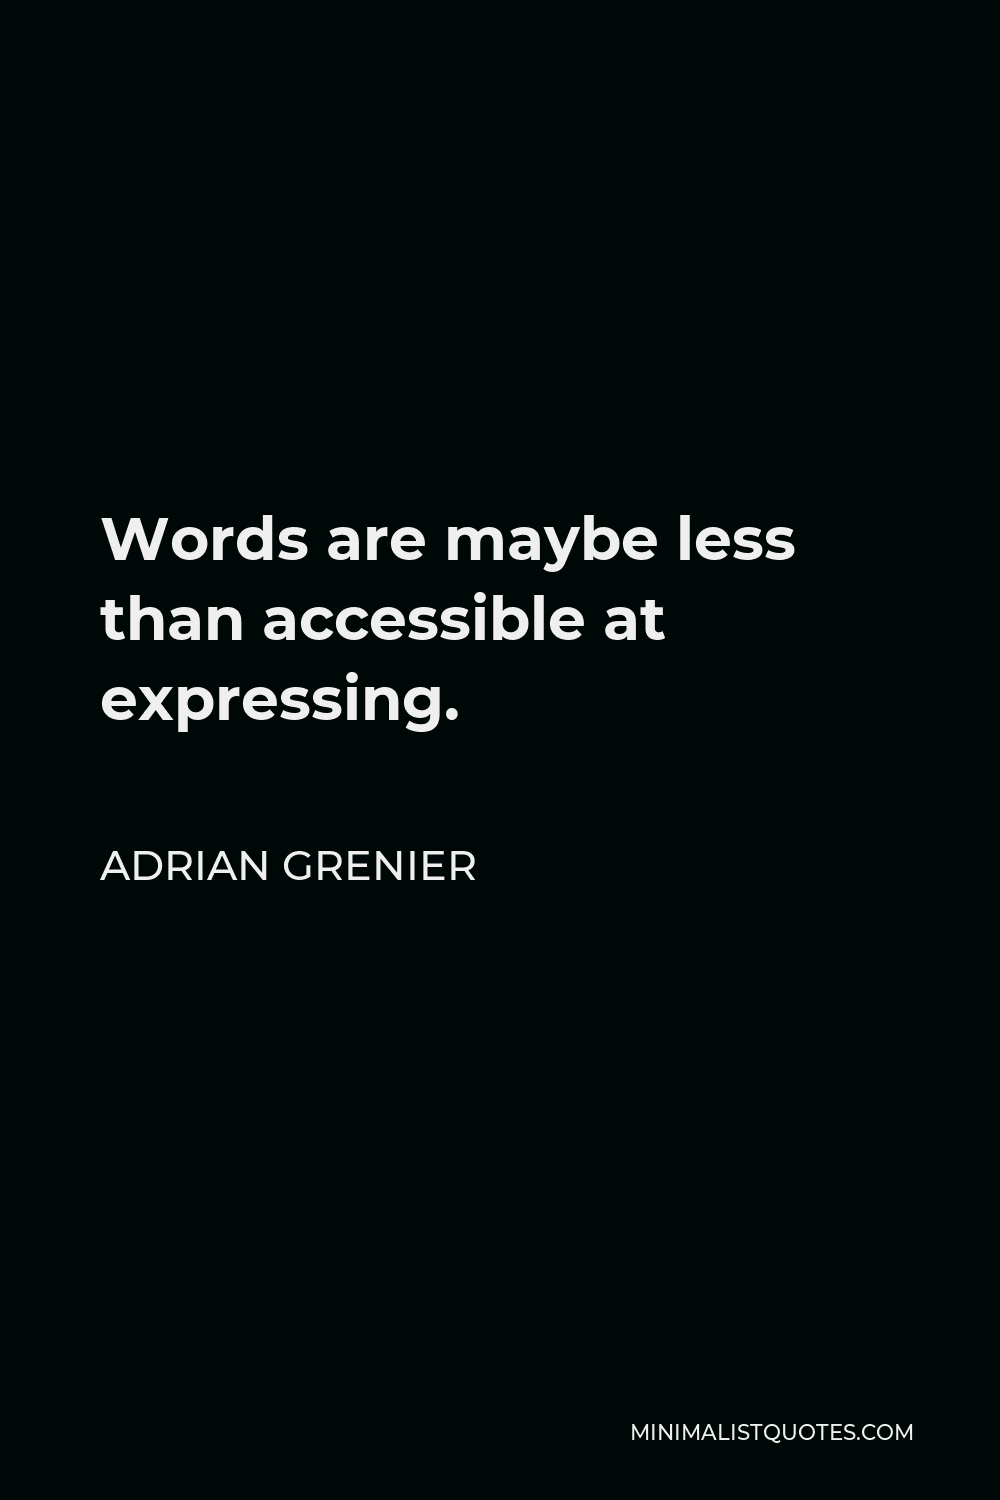 Adrian Grenier Quote - Words are maybe less than accessible at expressing.